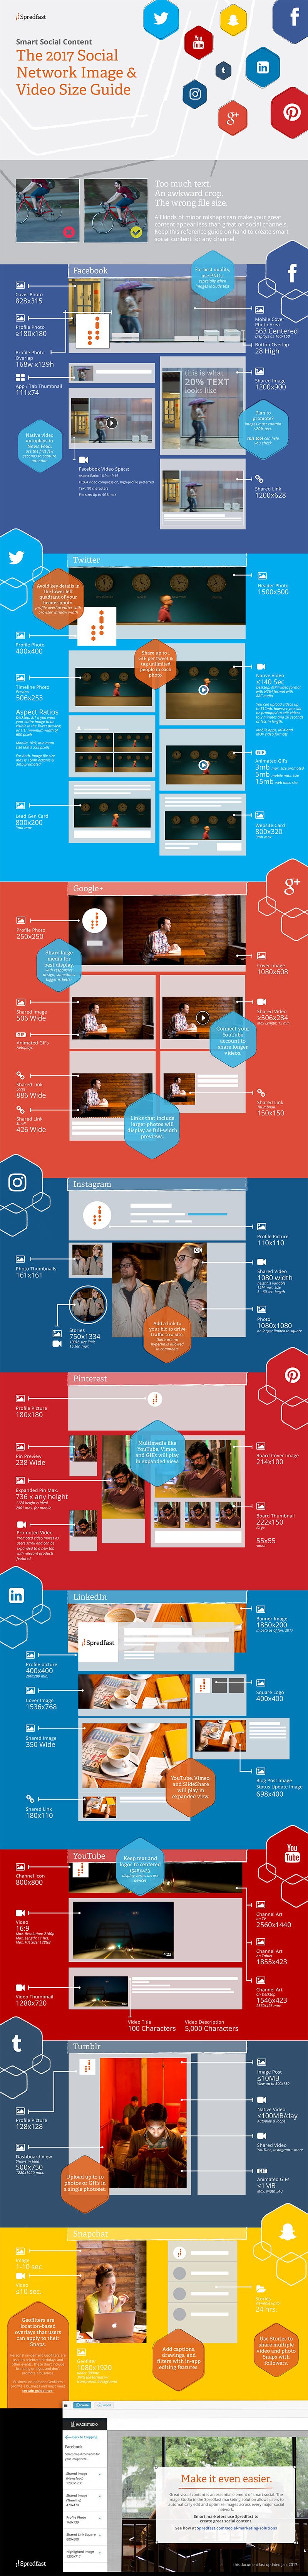 2017 sizing for social media infographic tipsheet by spredfast